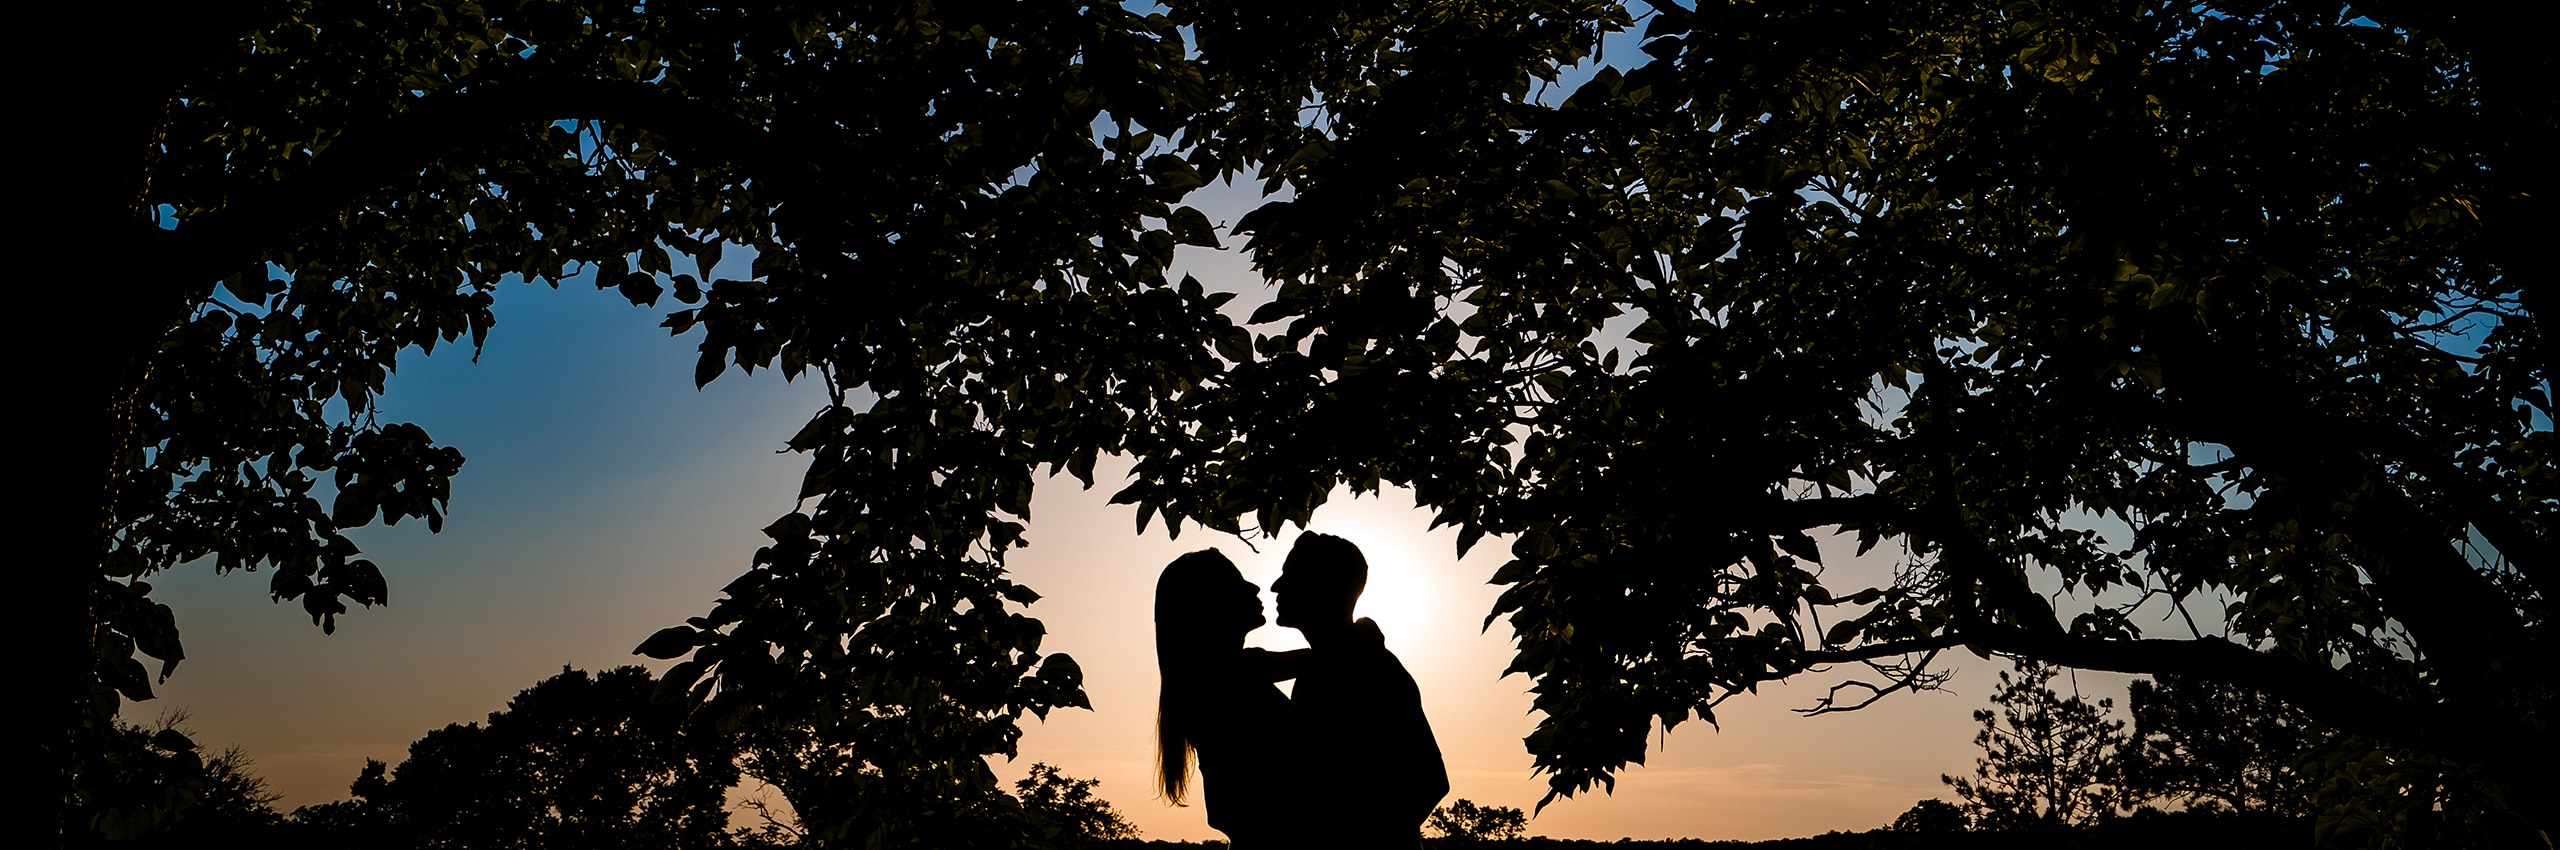 A colorful silhouetted image of a couple leaning in to share a kiss at sunset, a canopy of trees surrounding them.